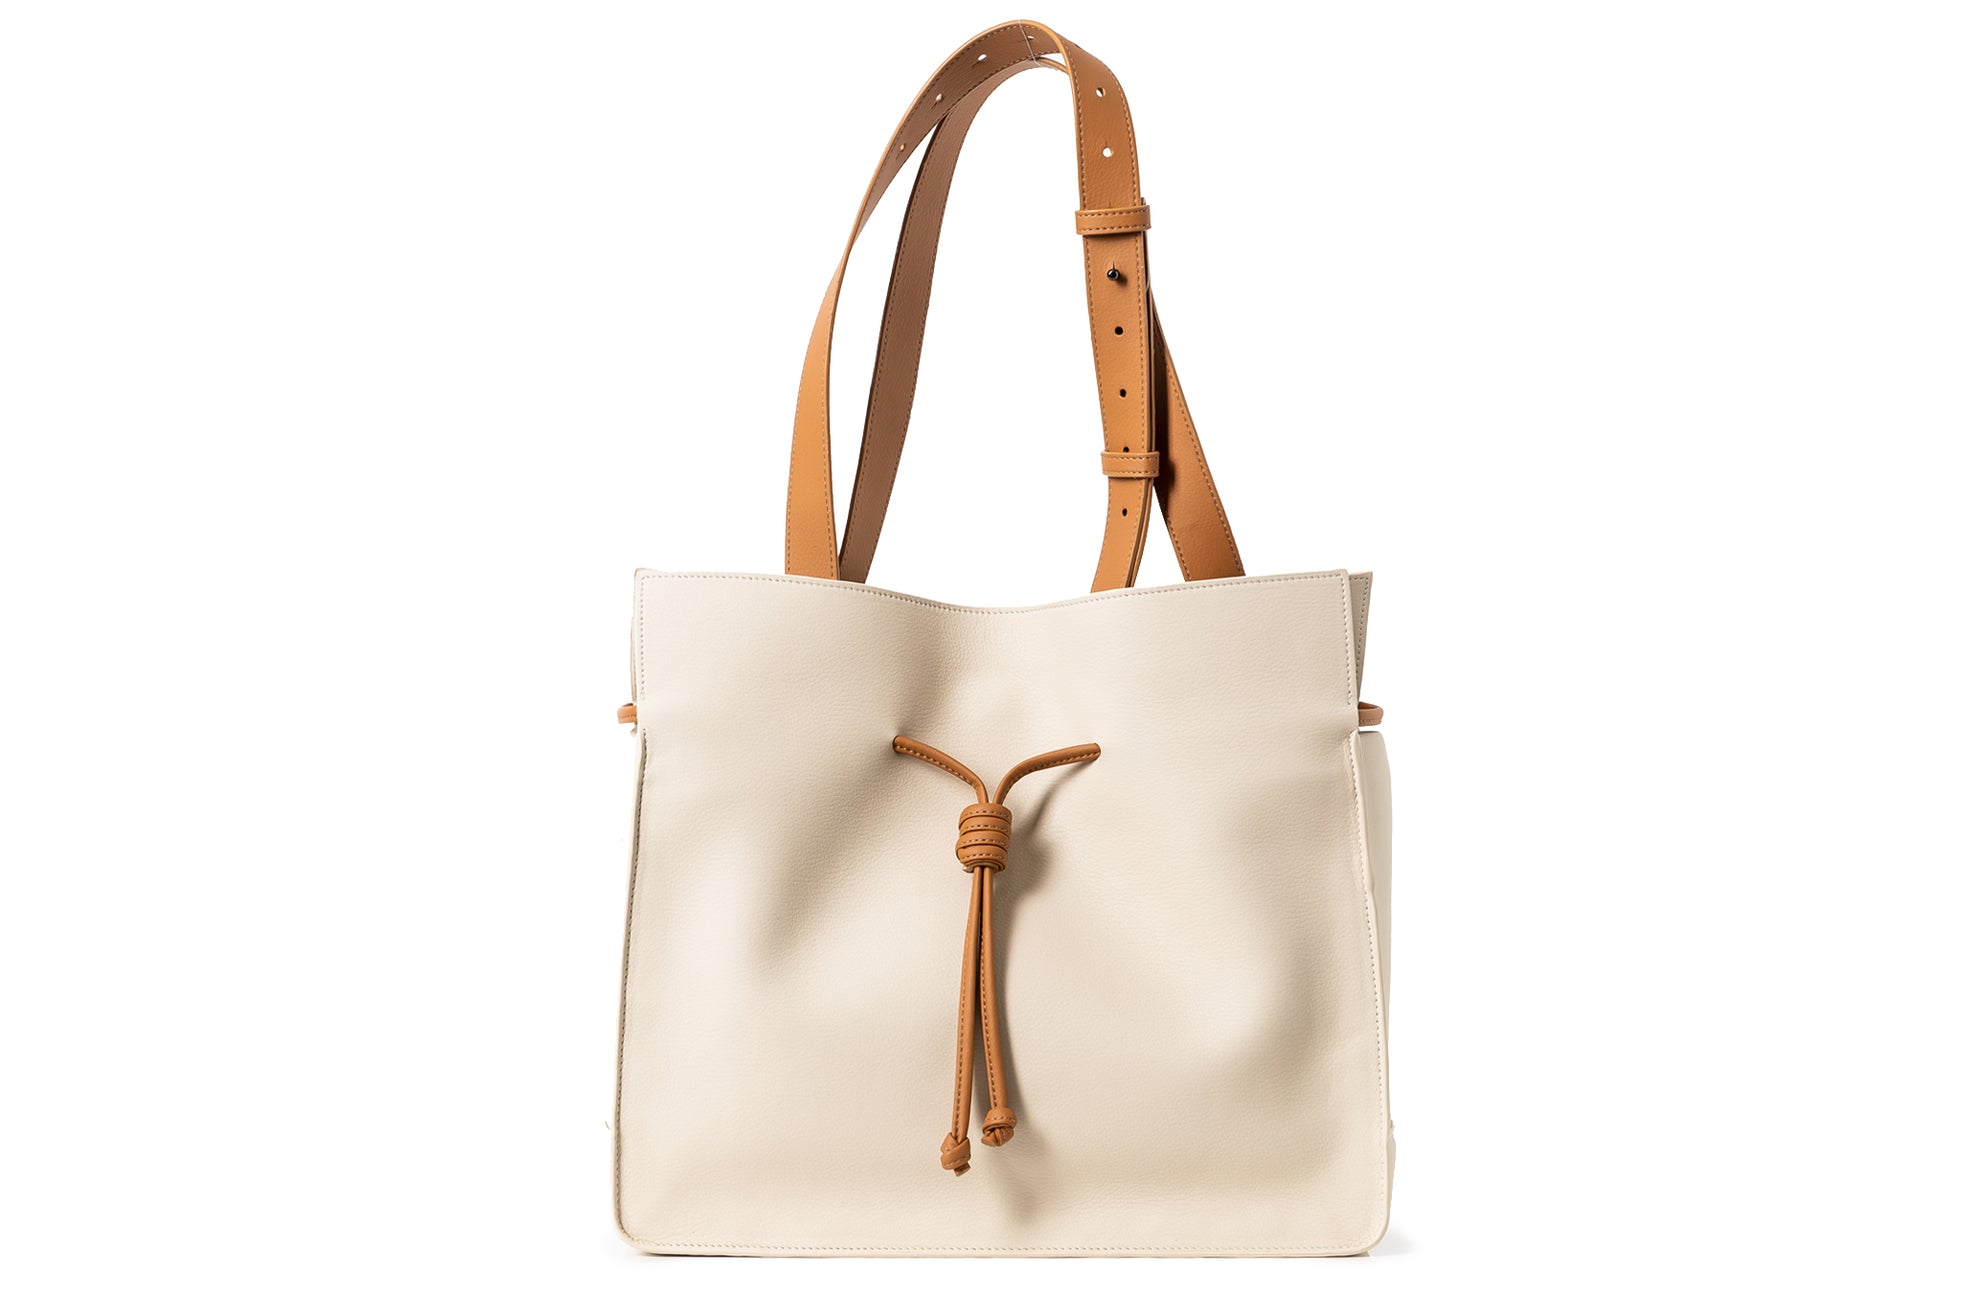 The Medium Shopper in Technik-Leather in Oat and Caramel image 1